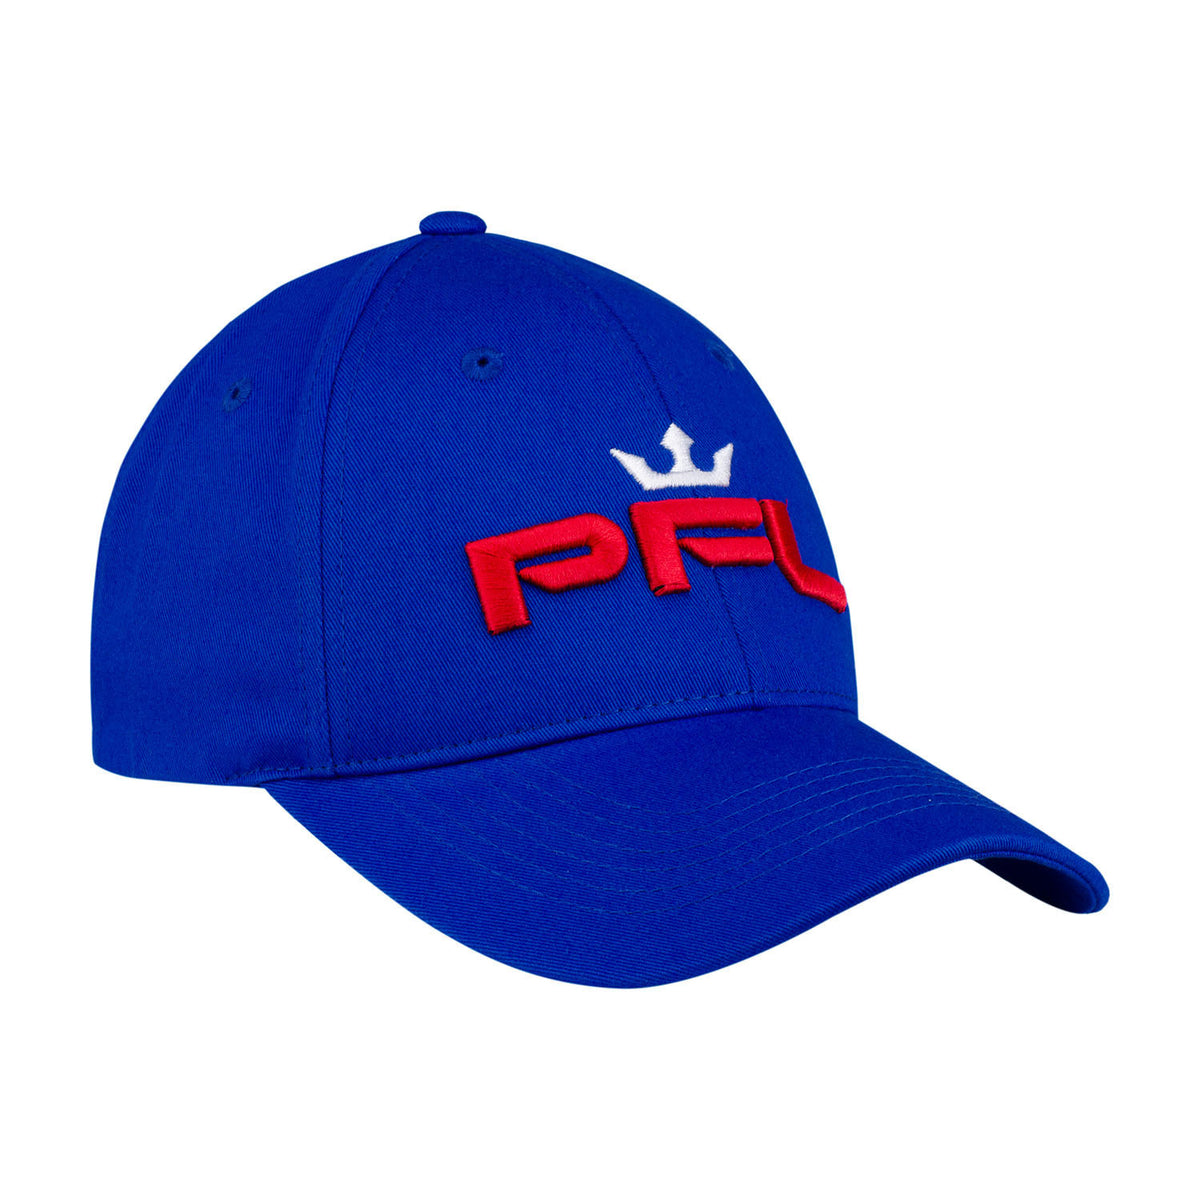 PFL Walkout Hat in Blue - Right Side View